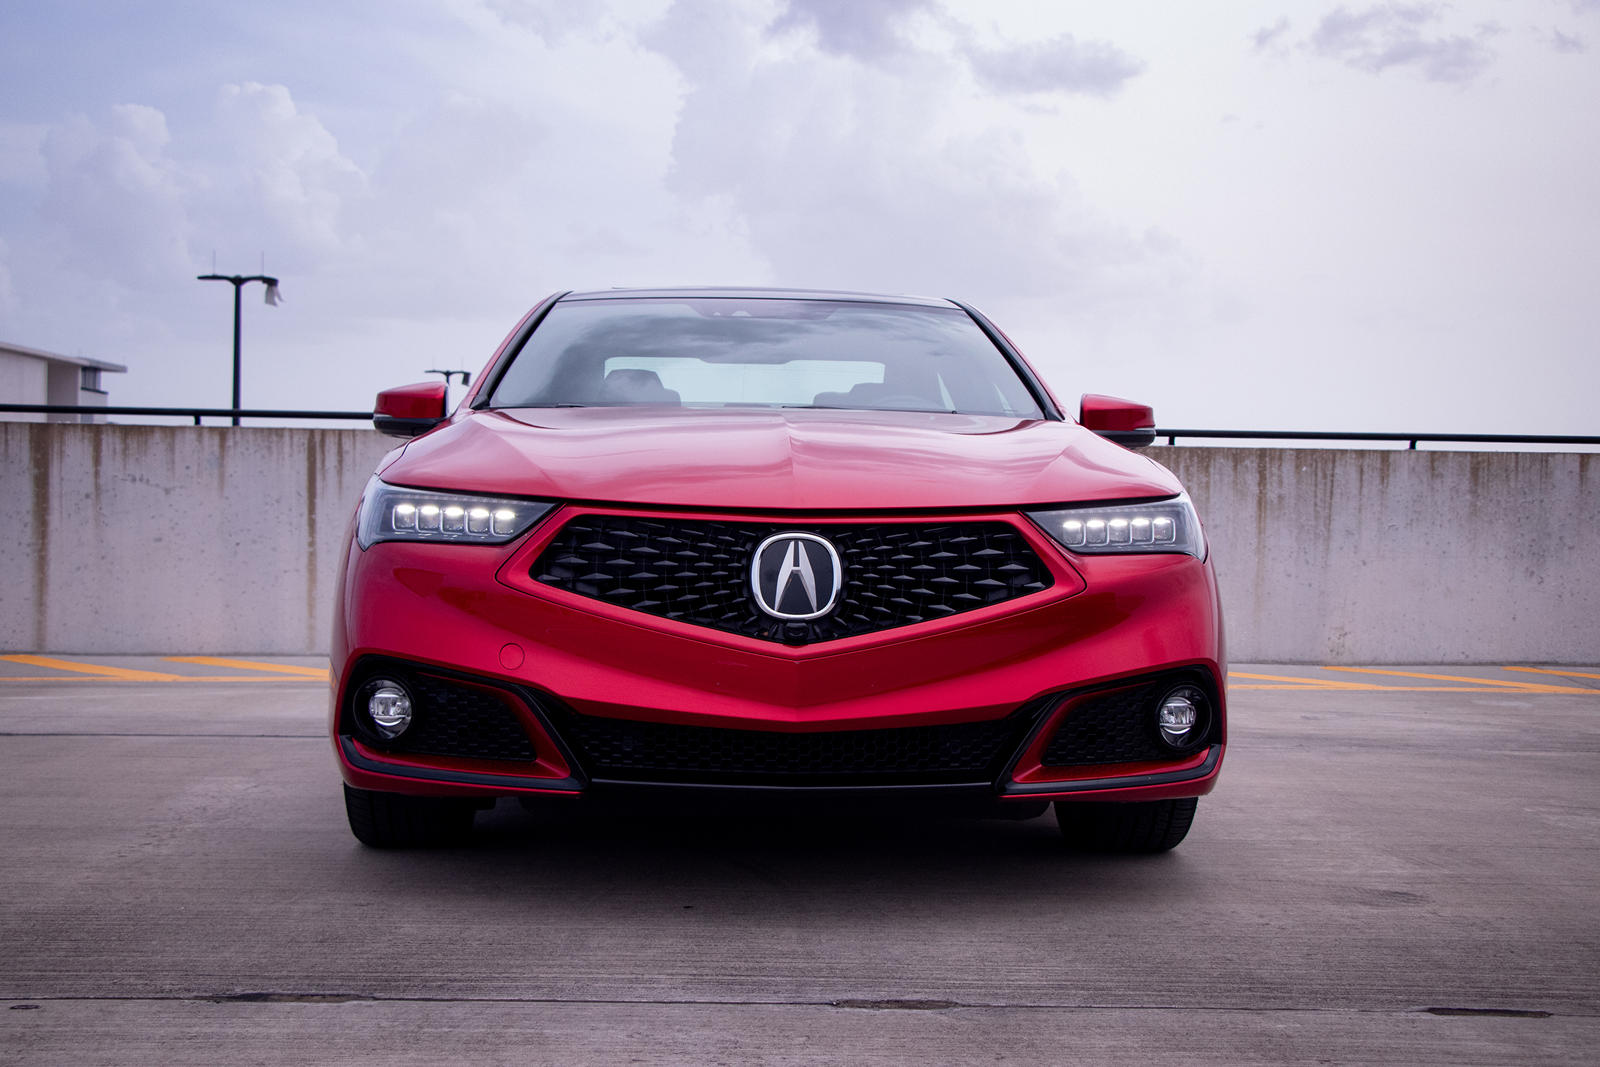 2018 Acura TLX Forward View